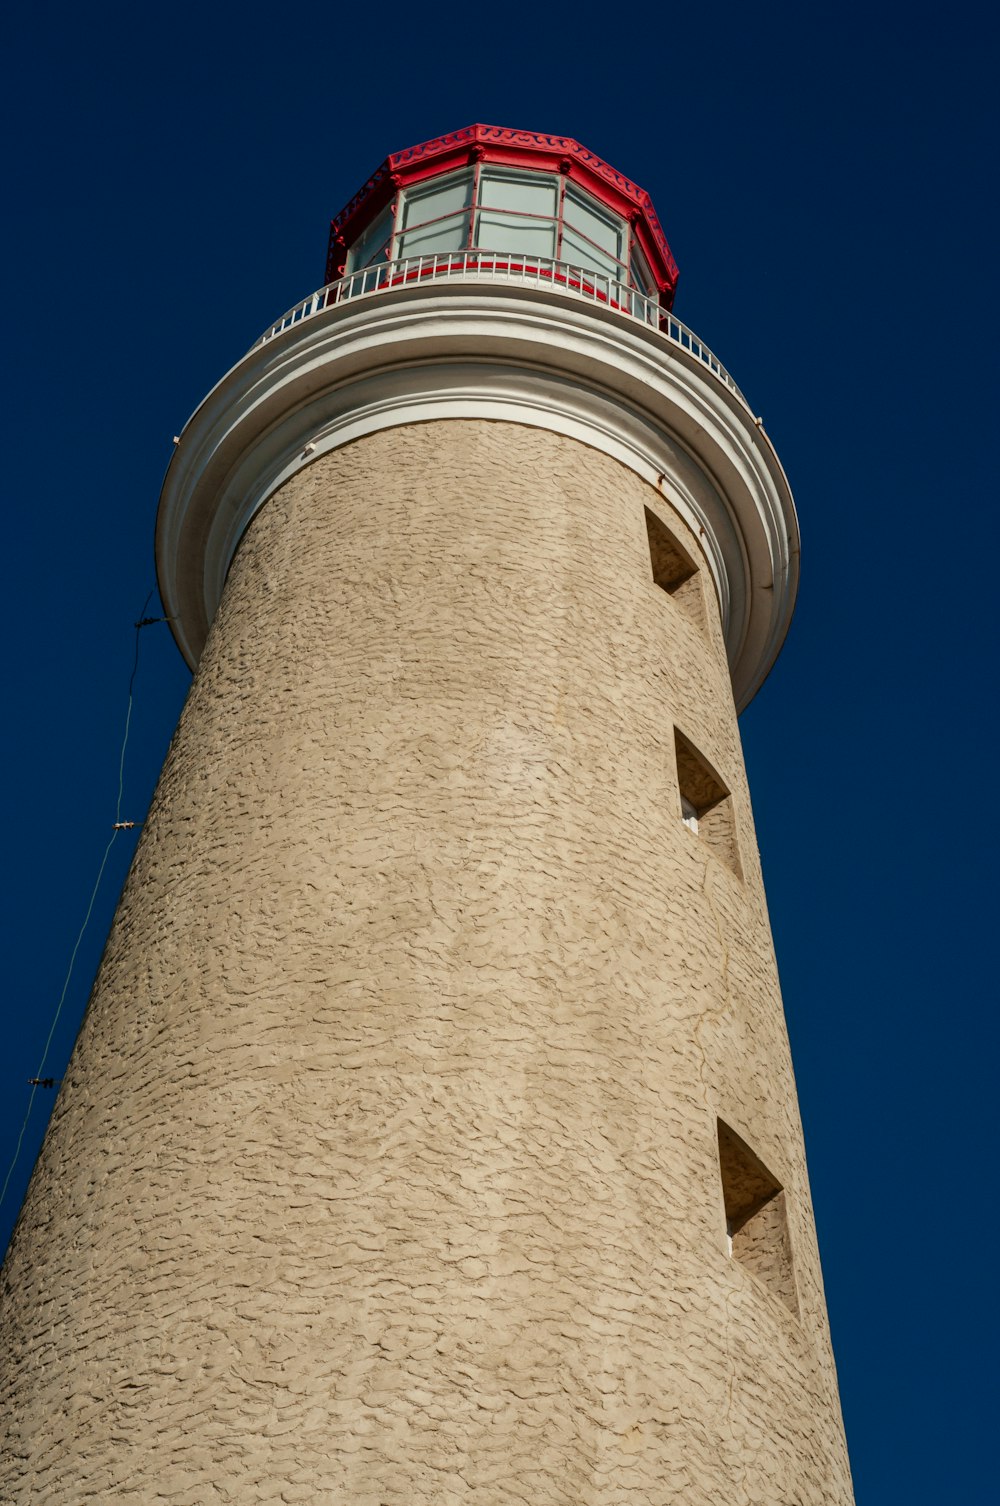 a tall light house with a red roof